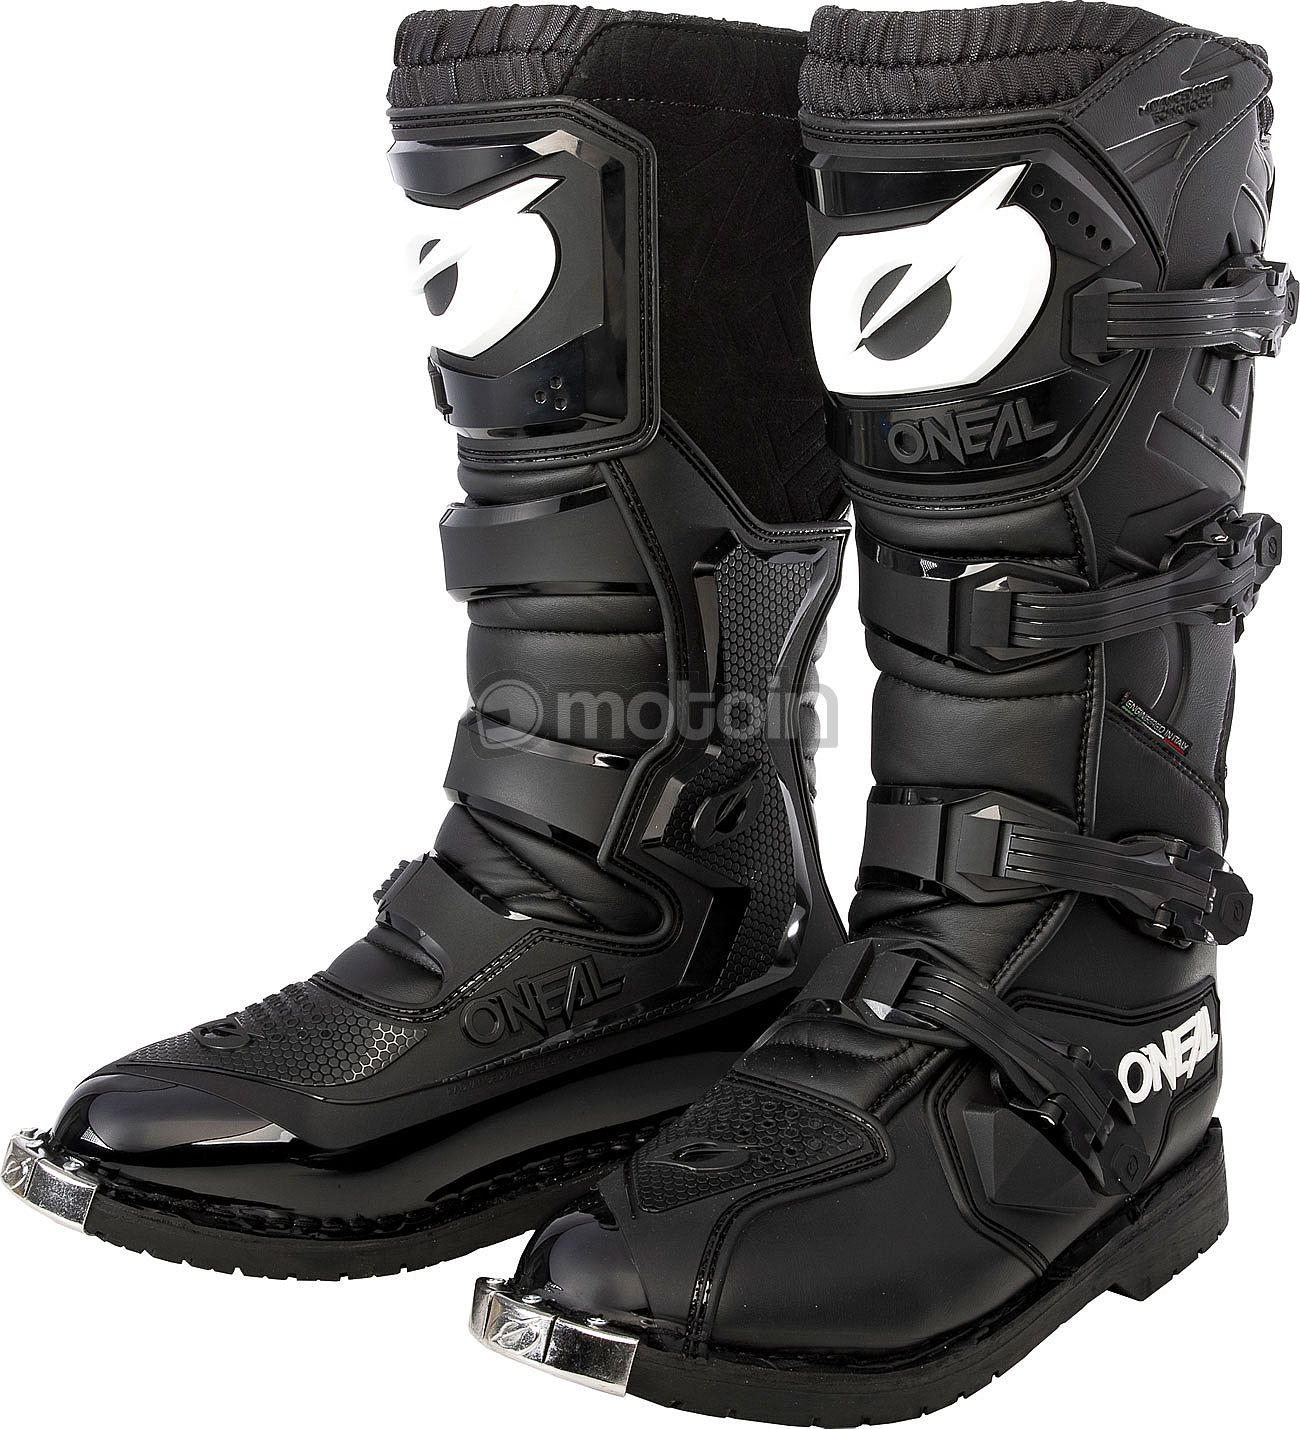 ONeal Rider, buty